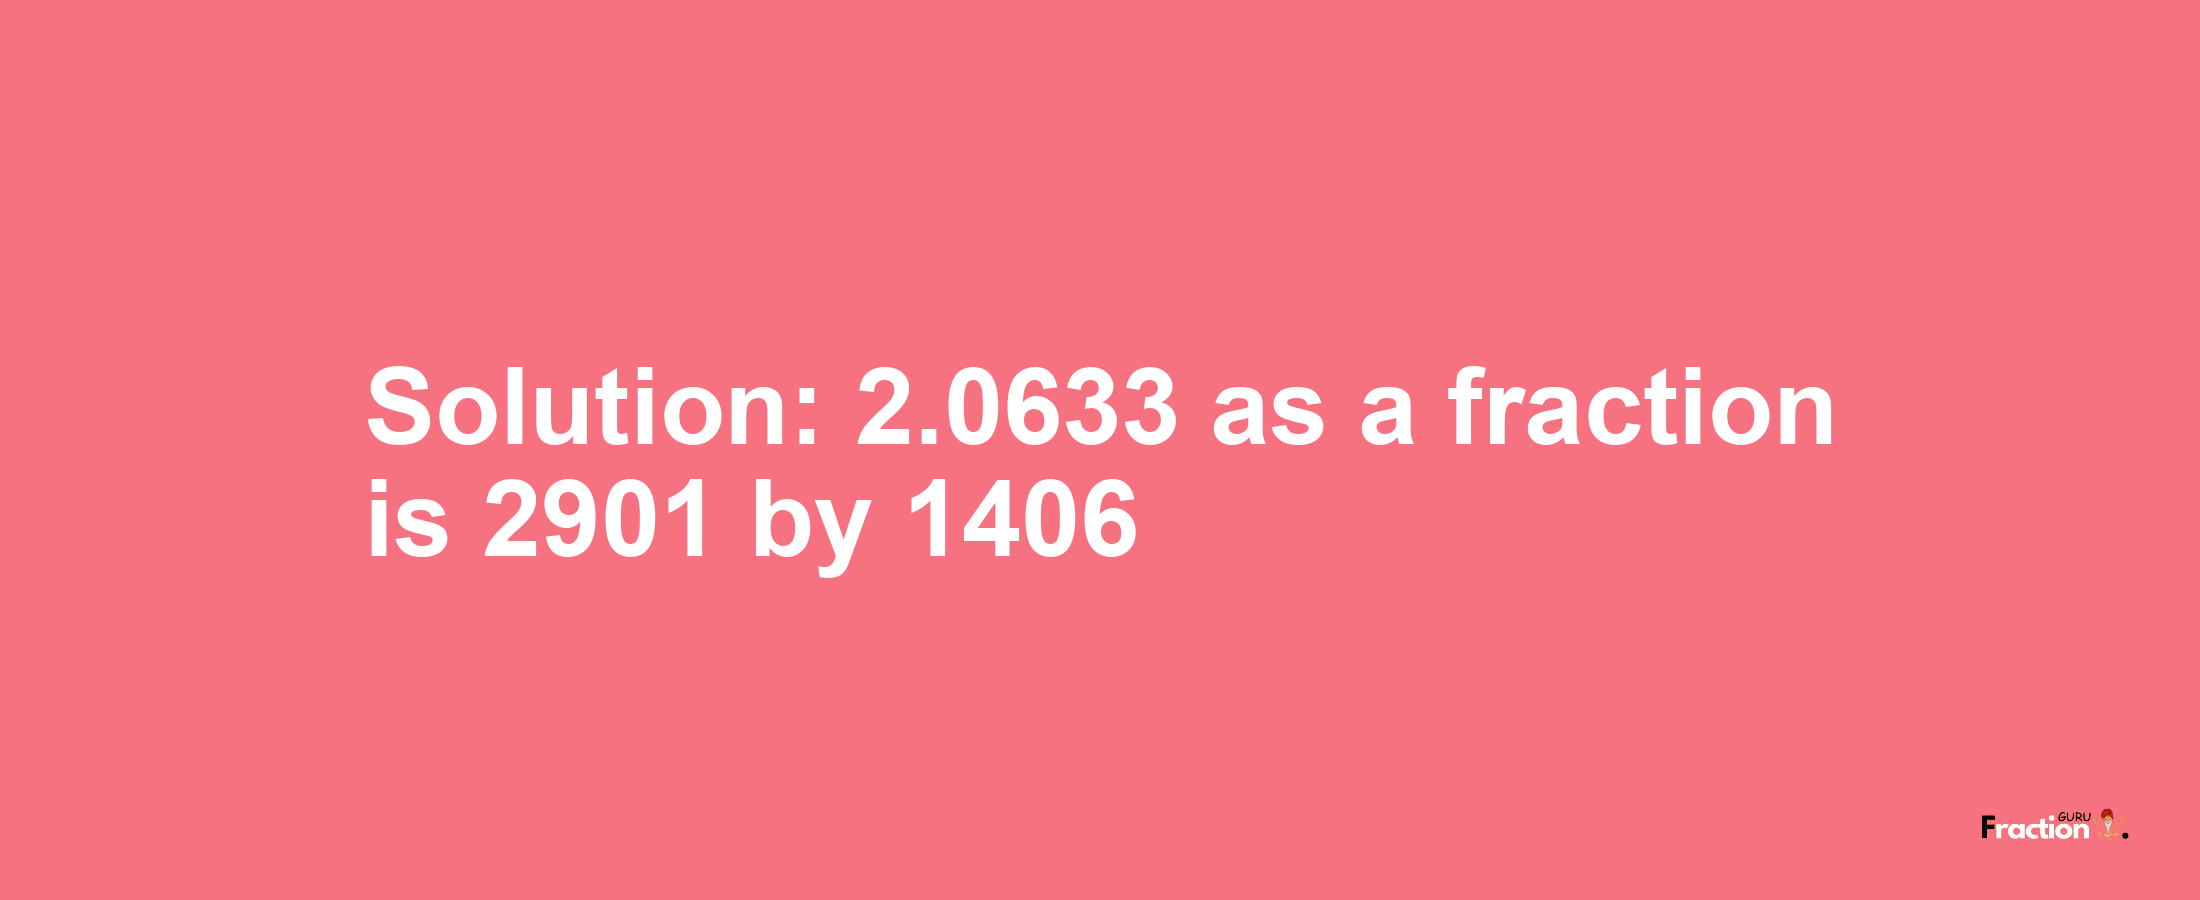 Solution:2.0633 as a fraction is 2901/1406